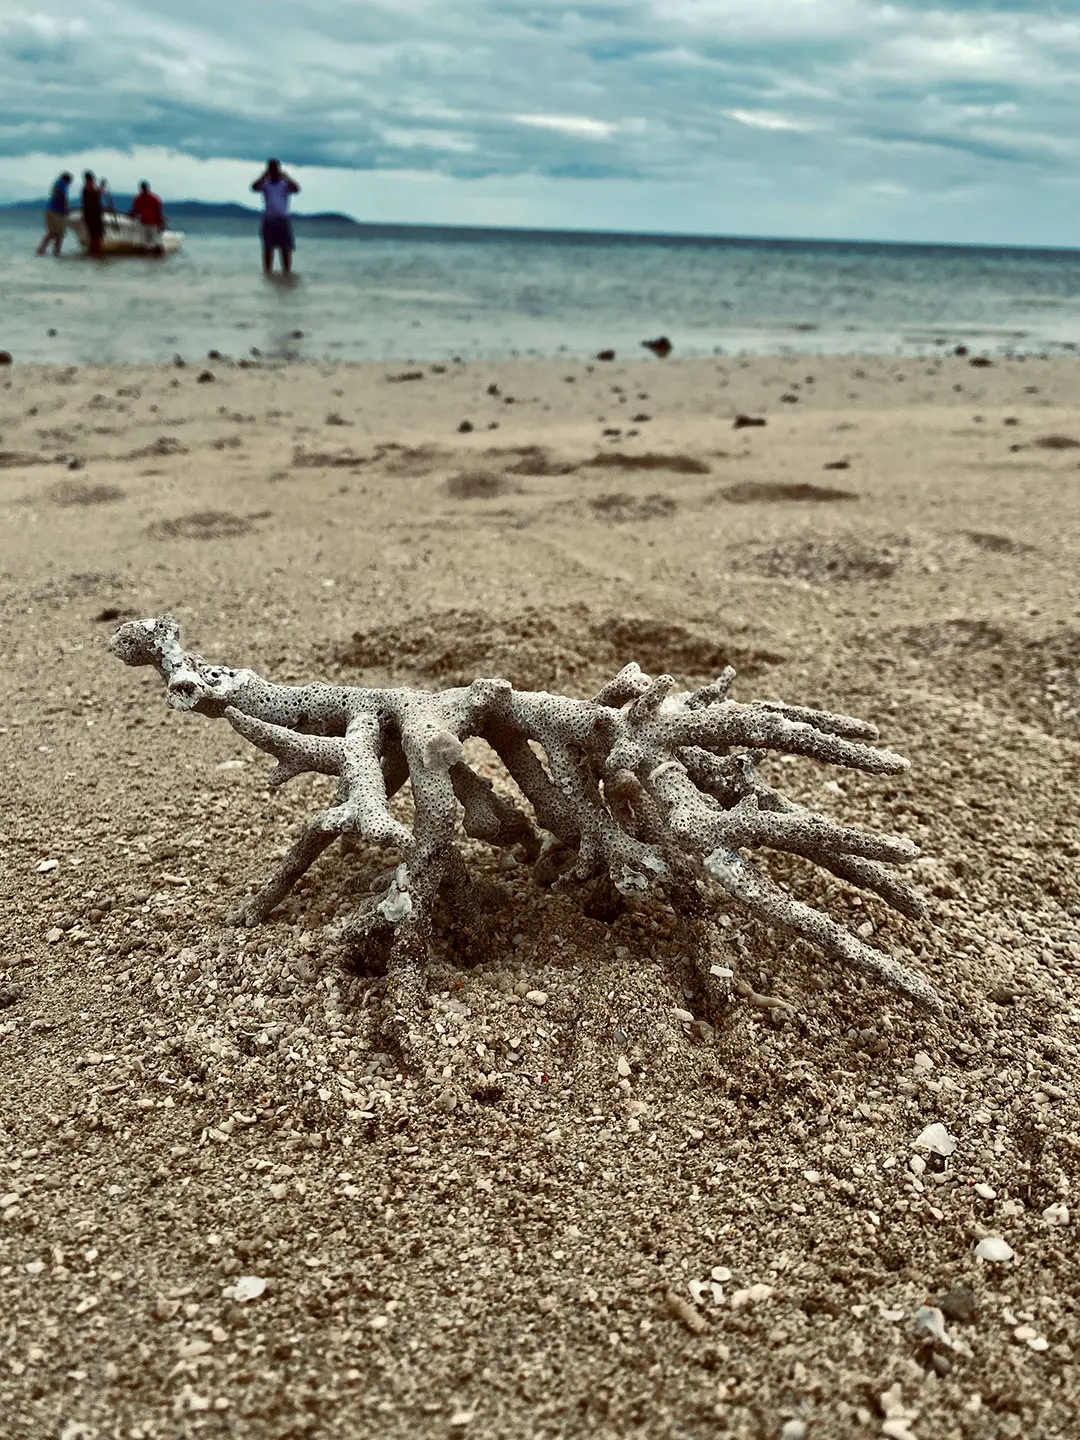 A piece of white coral on a beach. People getting out of a boat in the background. 